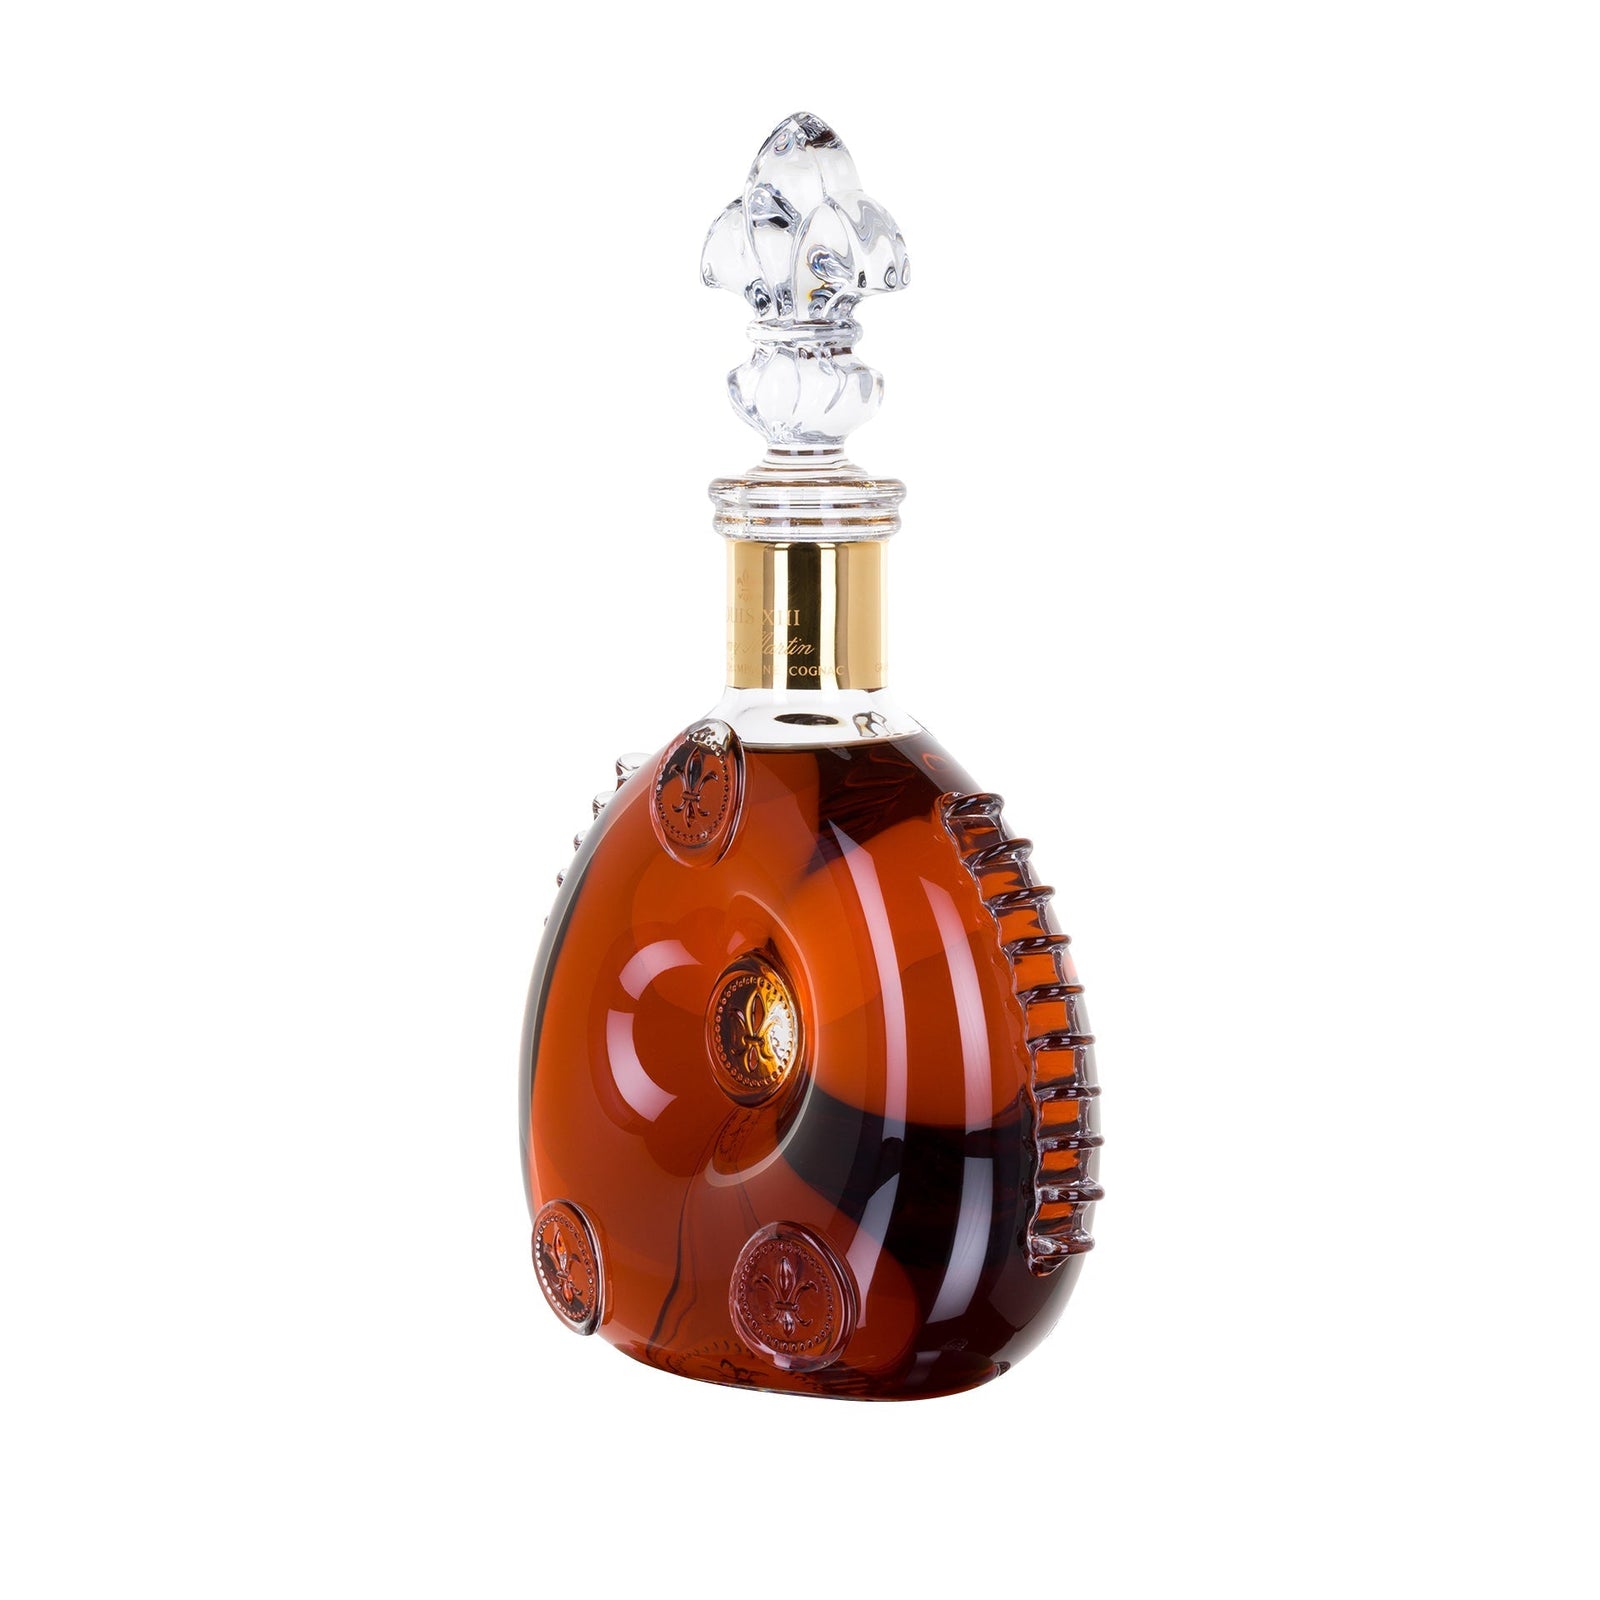 A packshot of LOUIS XIII Magnum decanter on a white background